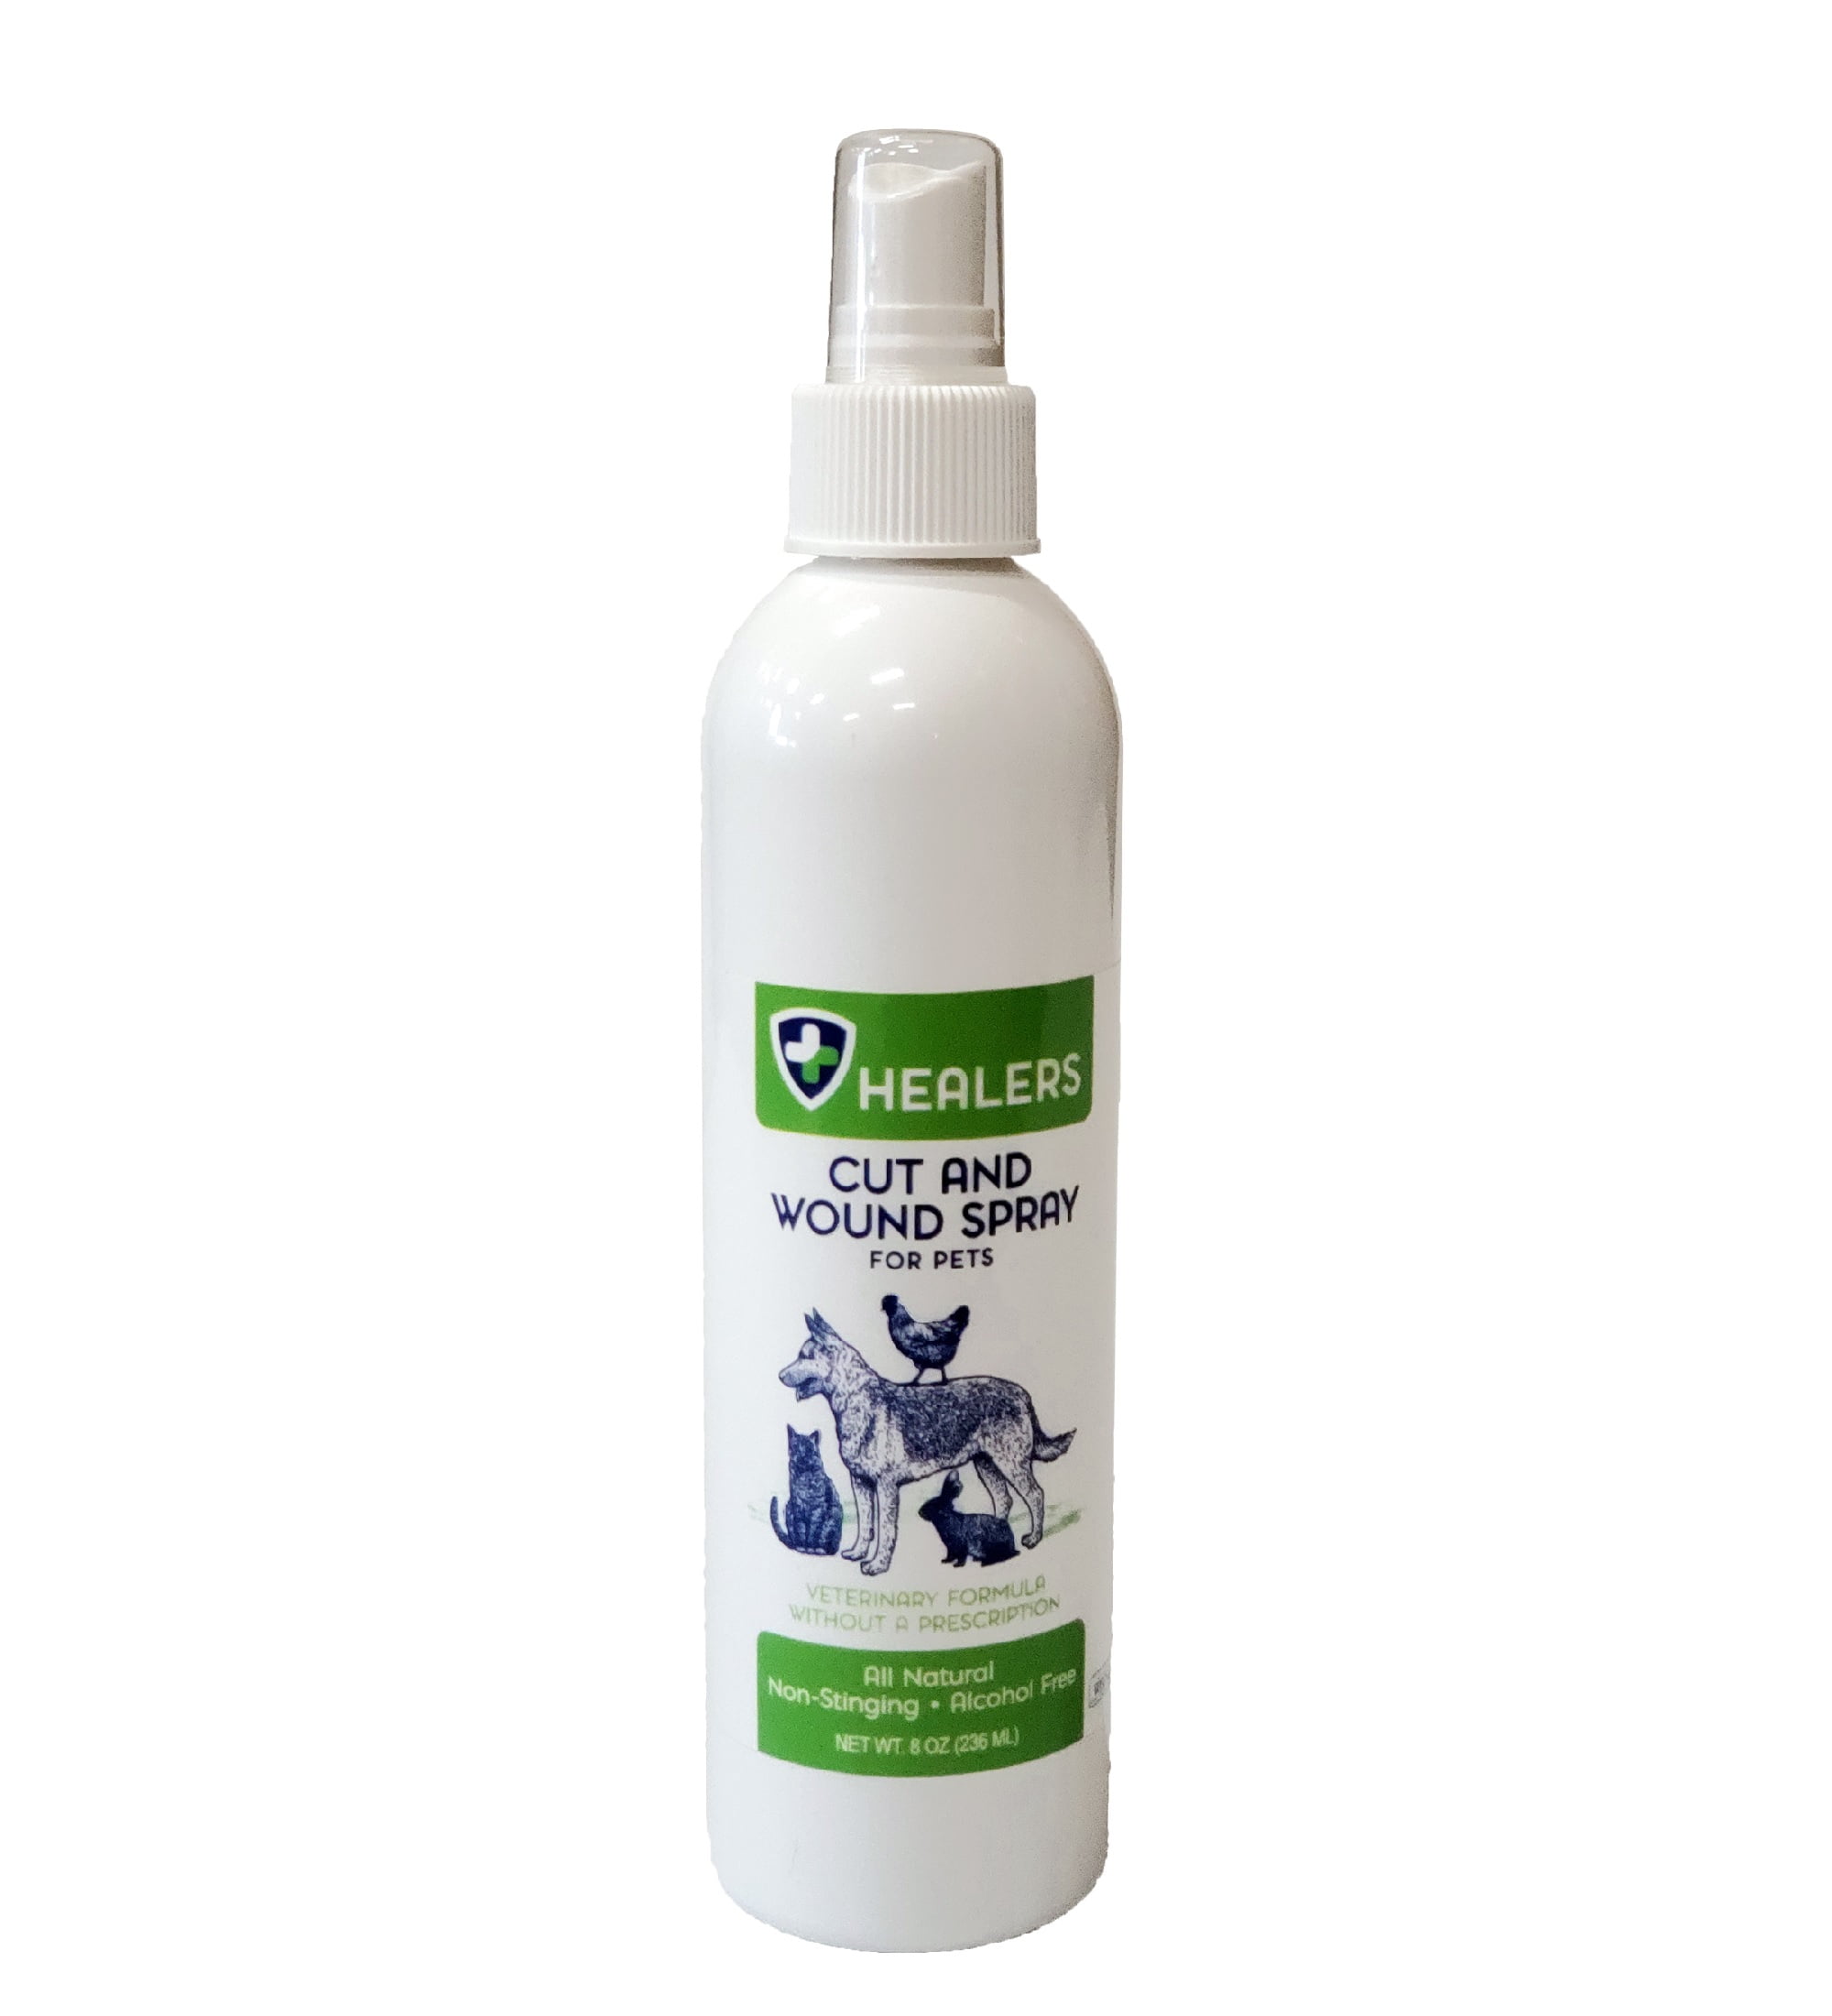 Healers Petcare Cut and Wound Spray for Pets, 8 oz. 